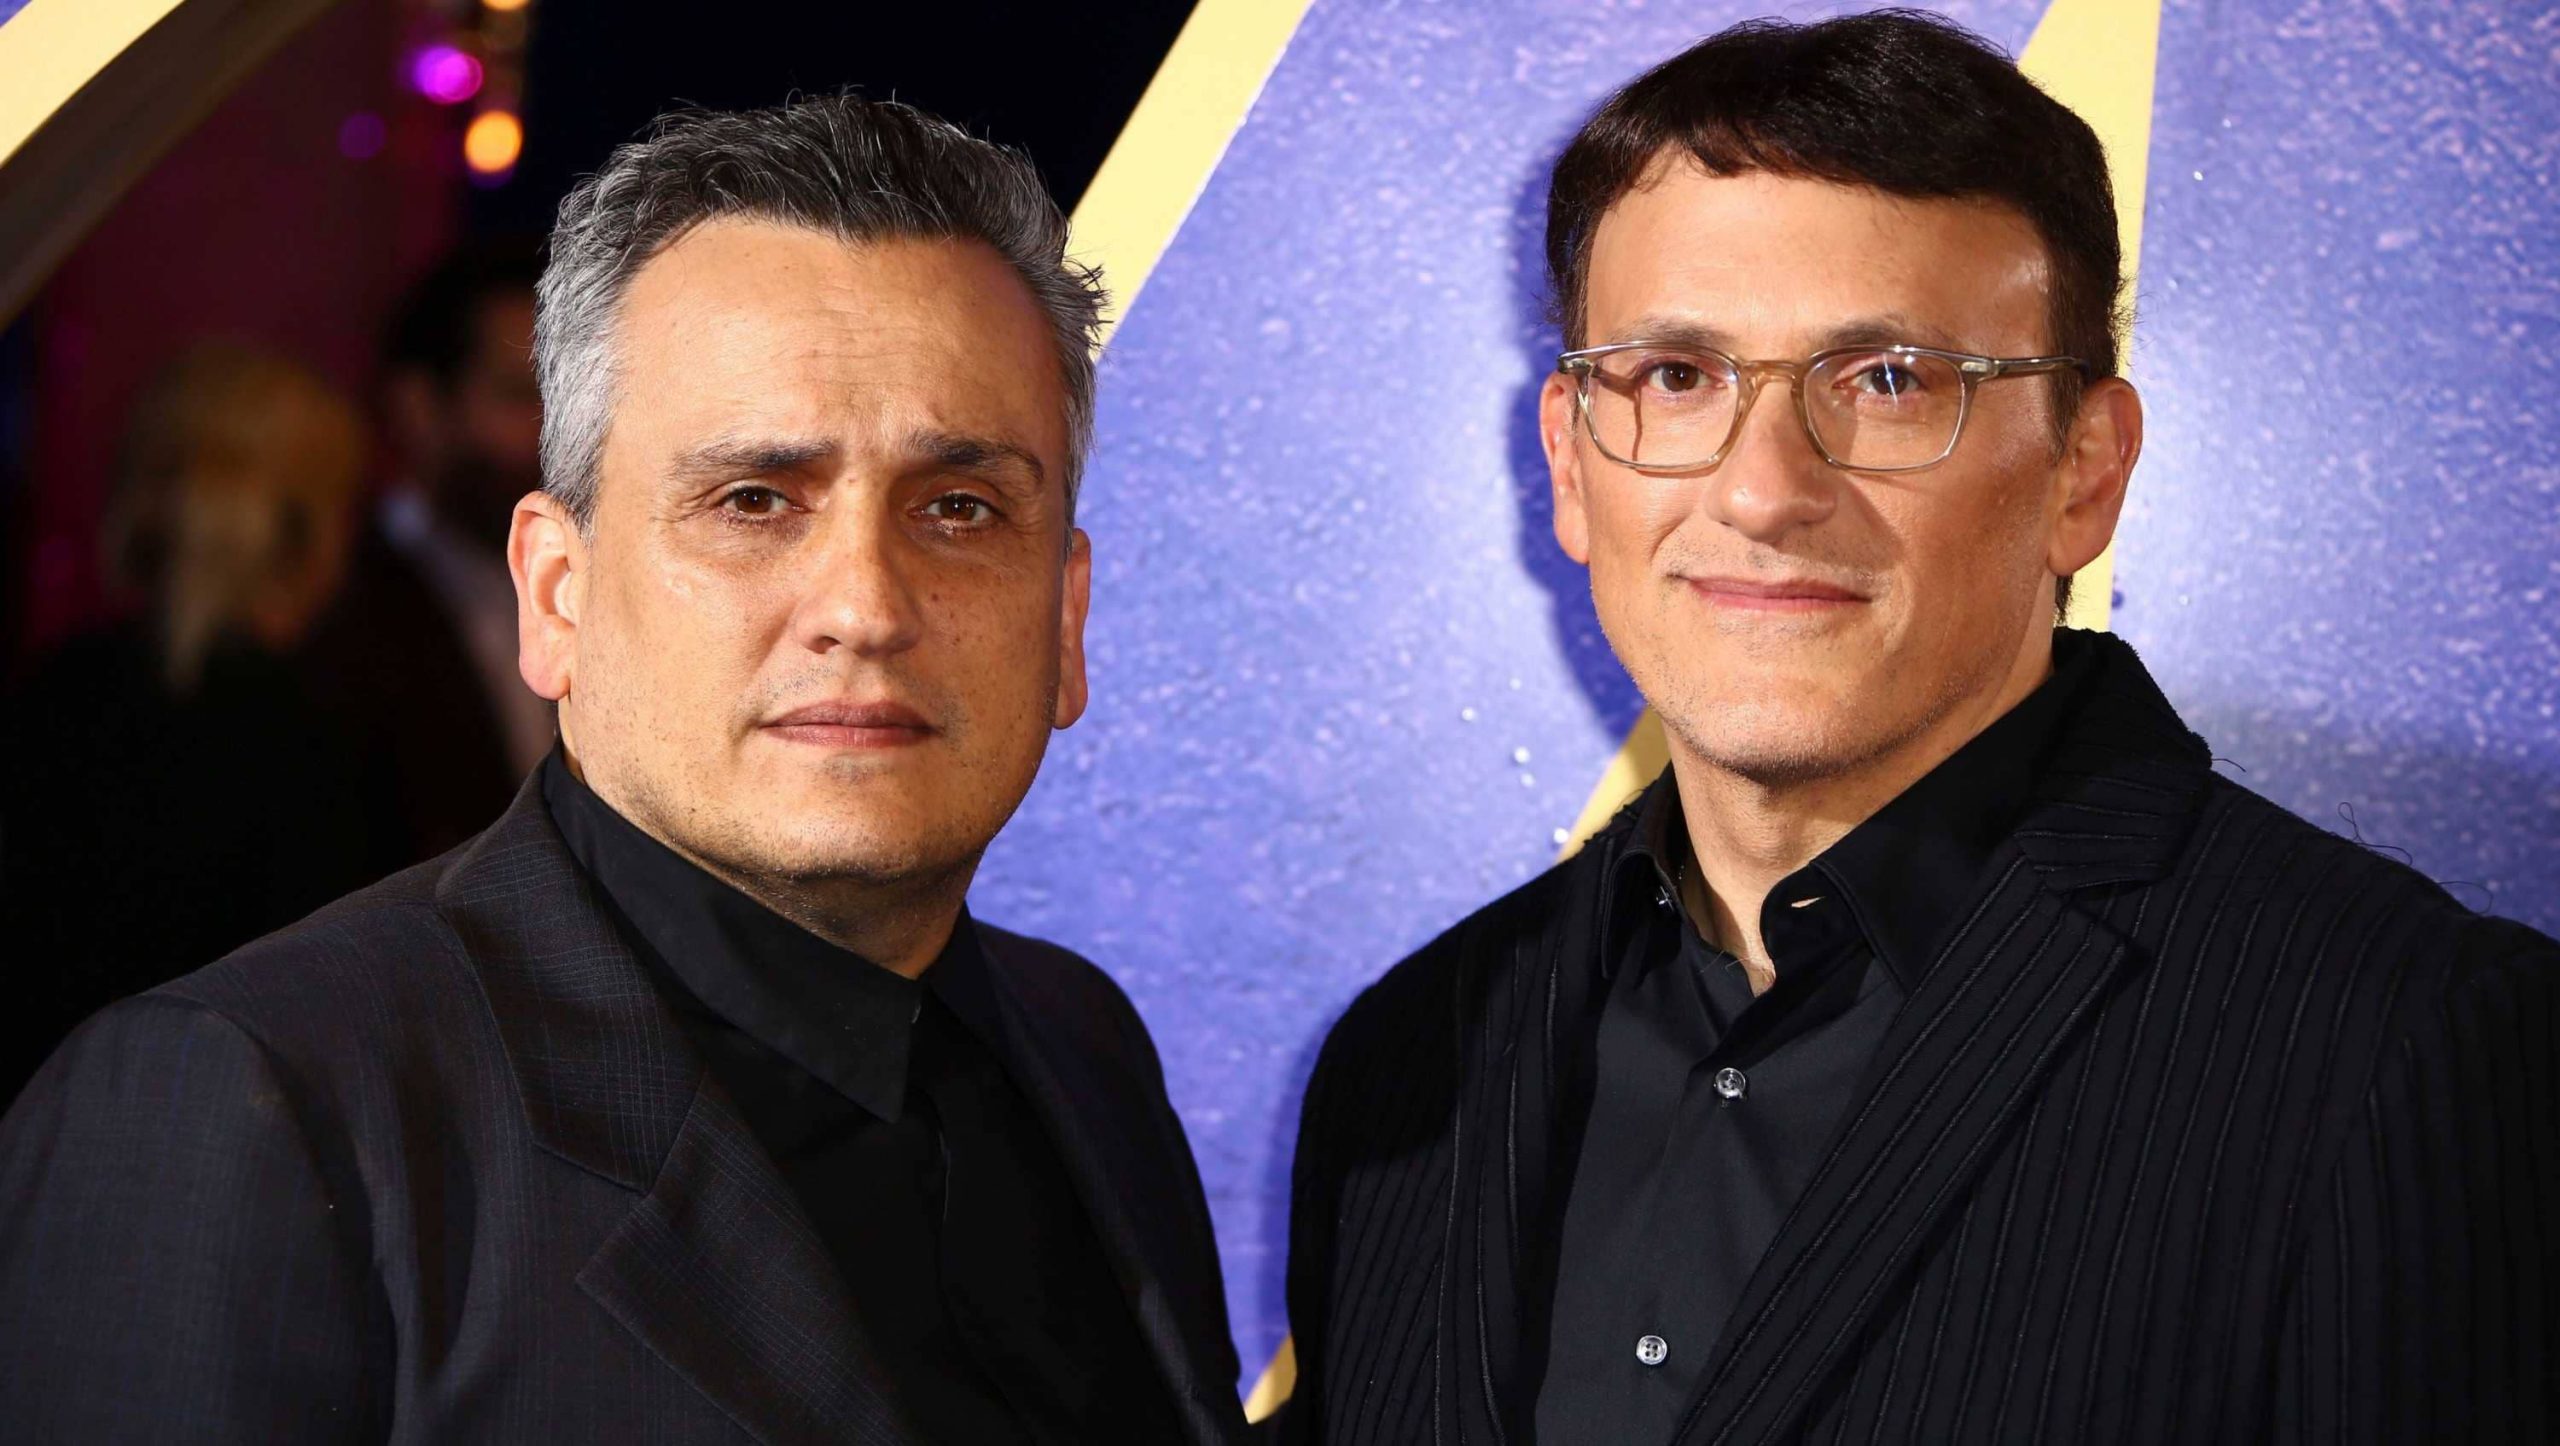 russo brothers e1556562179777 1 scaled